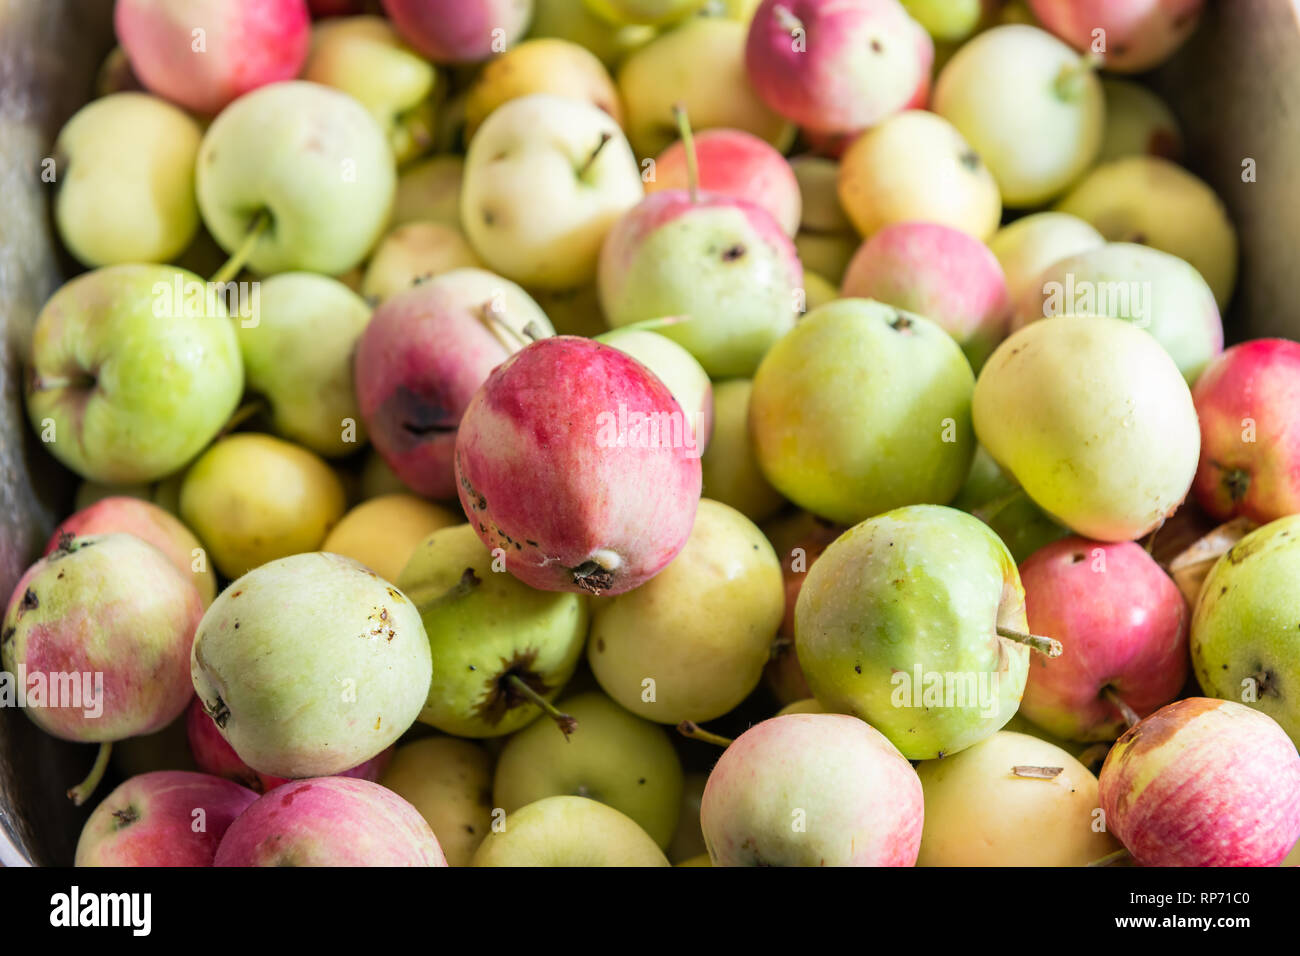 https://c8.alamy.com/comp/RP71C0/closeup-of-many-green-yellow-or-pink-lady-apples-in-box-or-sink-showing-detail-and-texture-for-processing-RP71C0.jpg